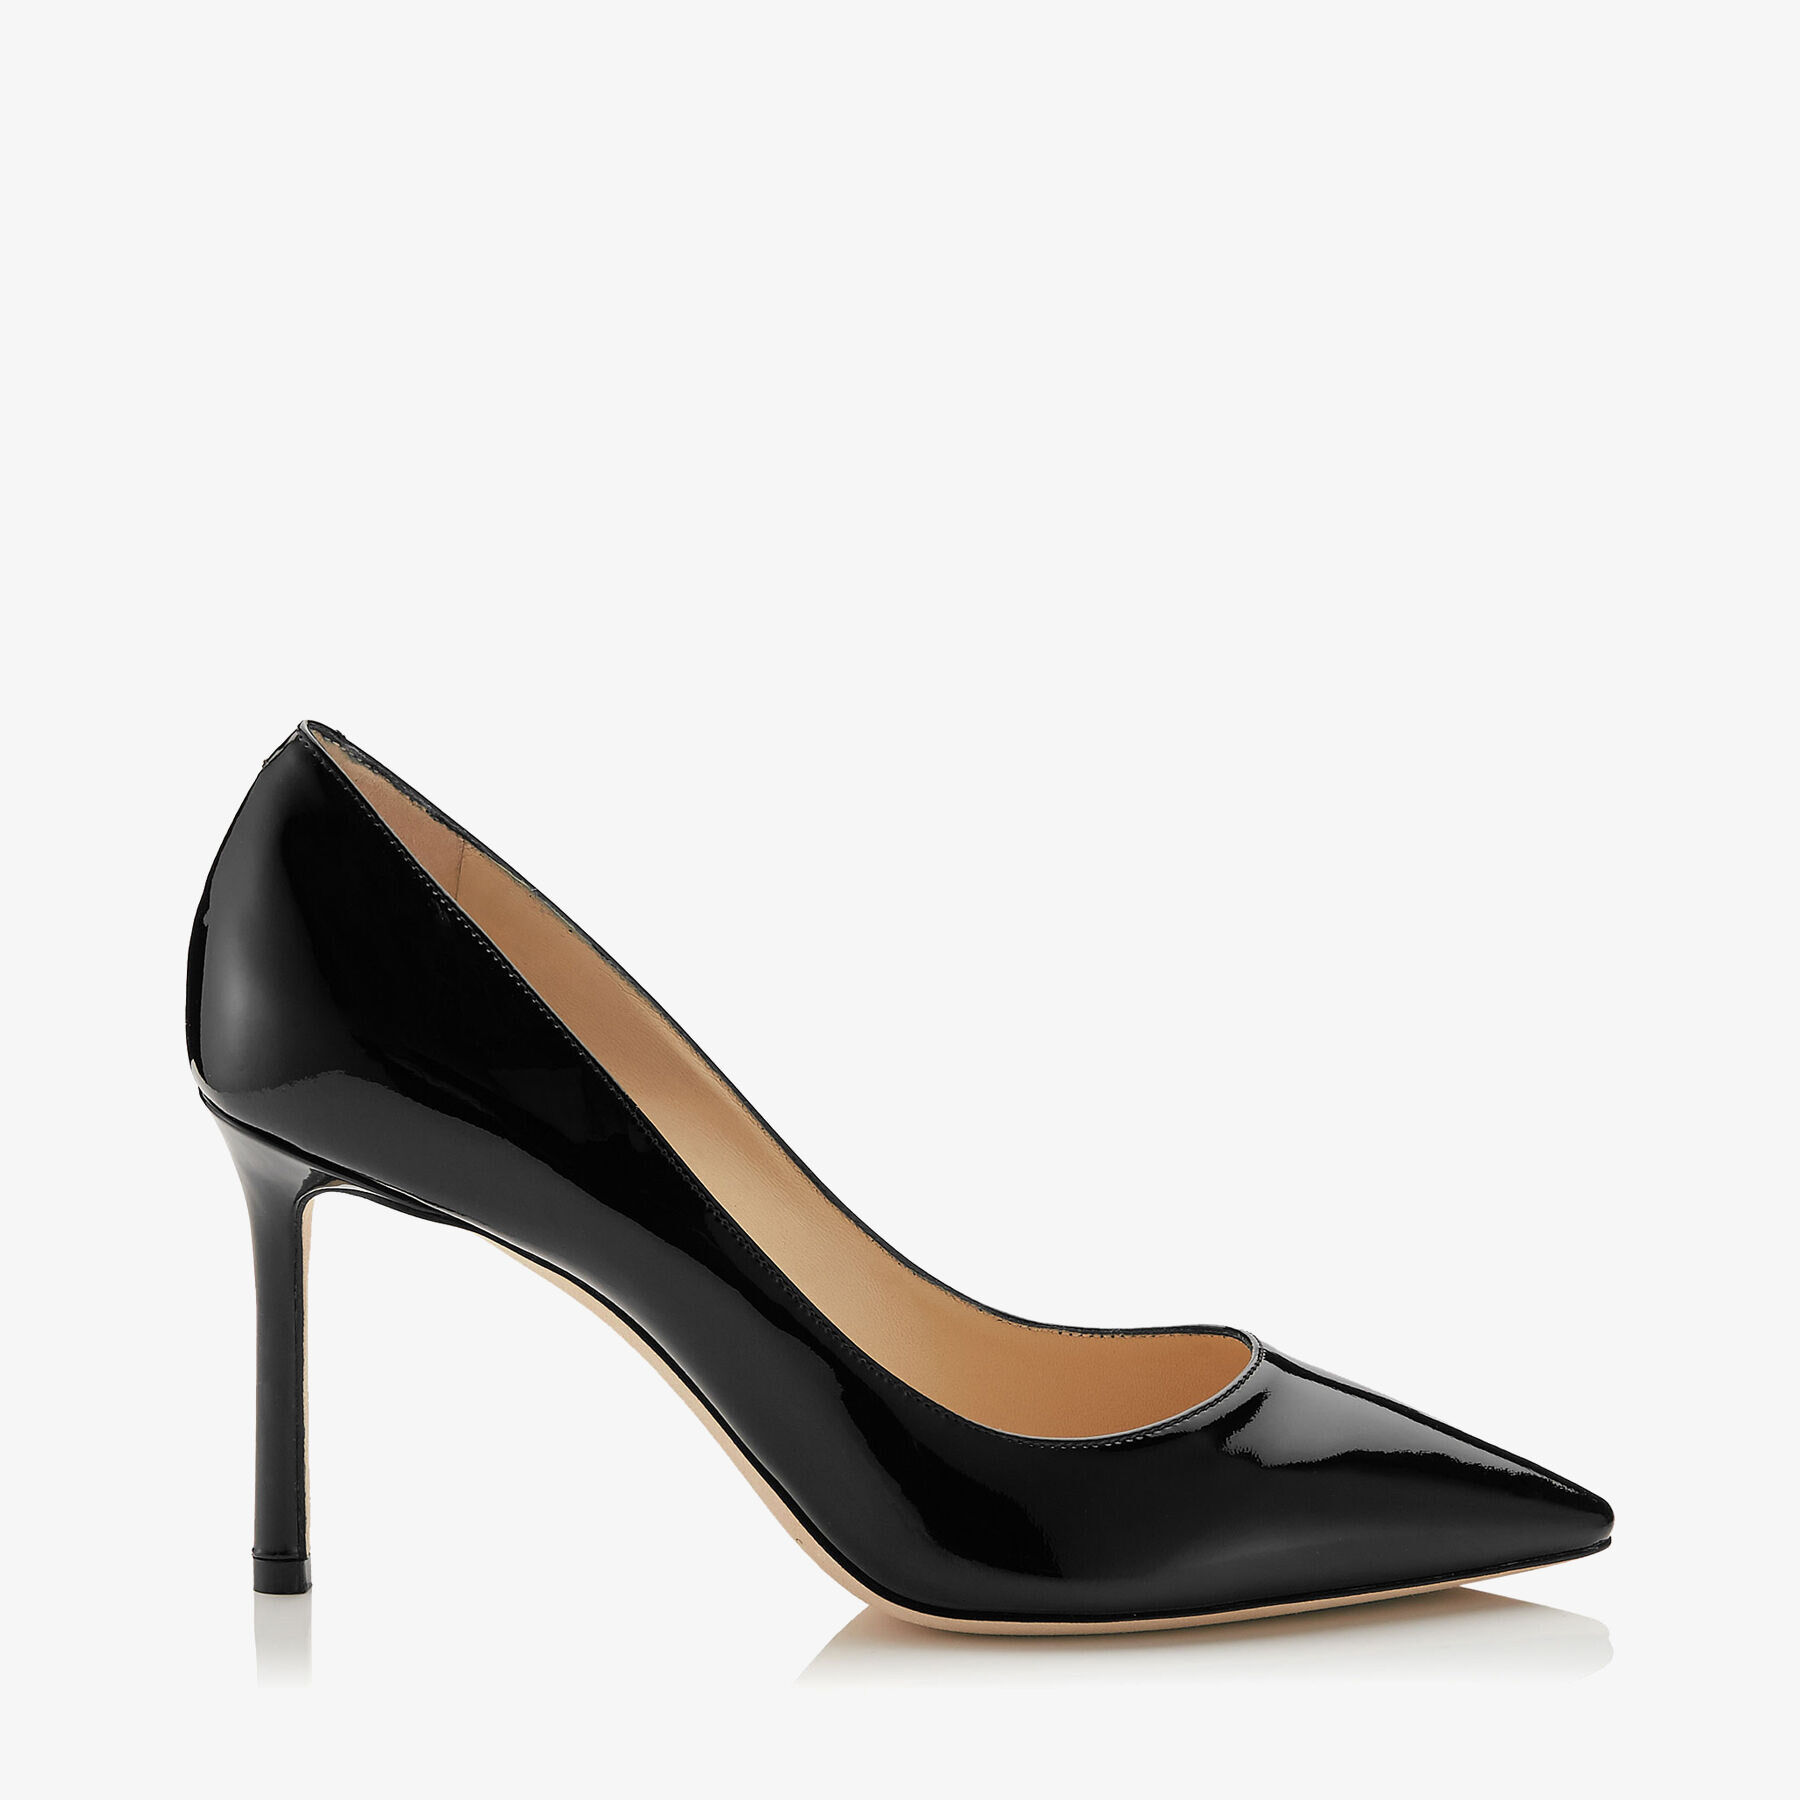 Black Patent Leather Pointy Toe Pumps | Romy 85 | Pre Fall 16